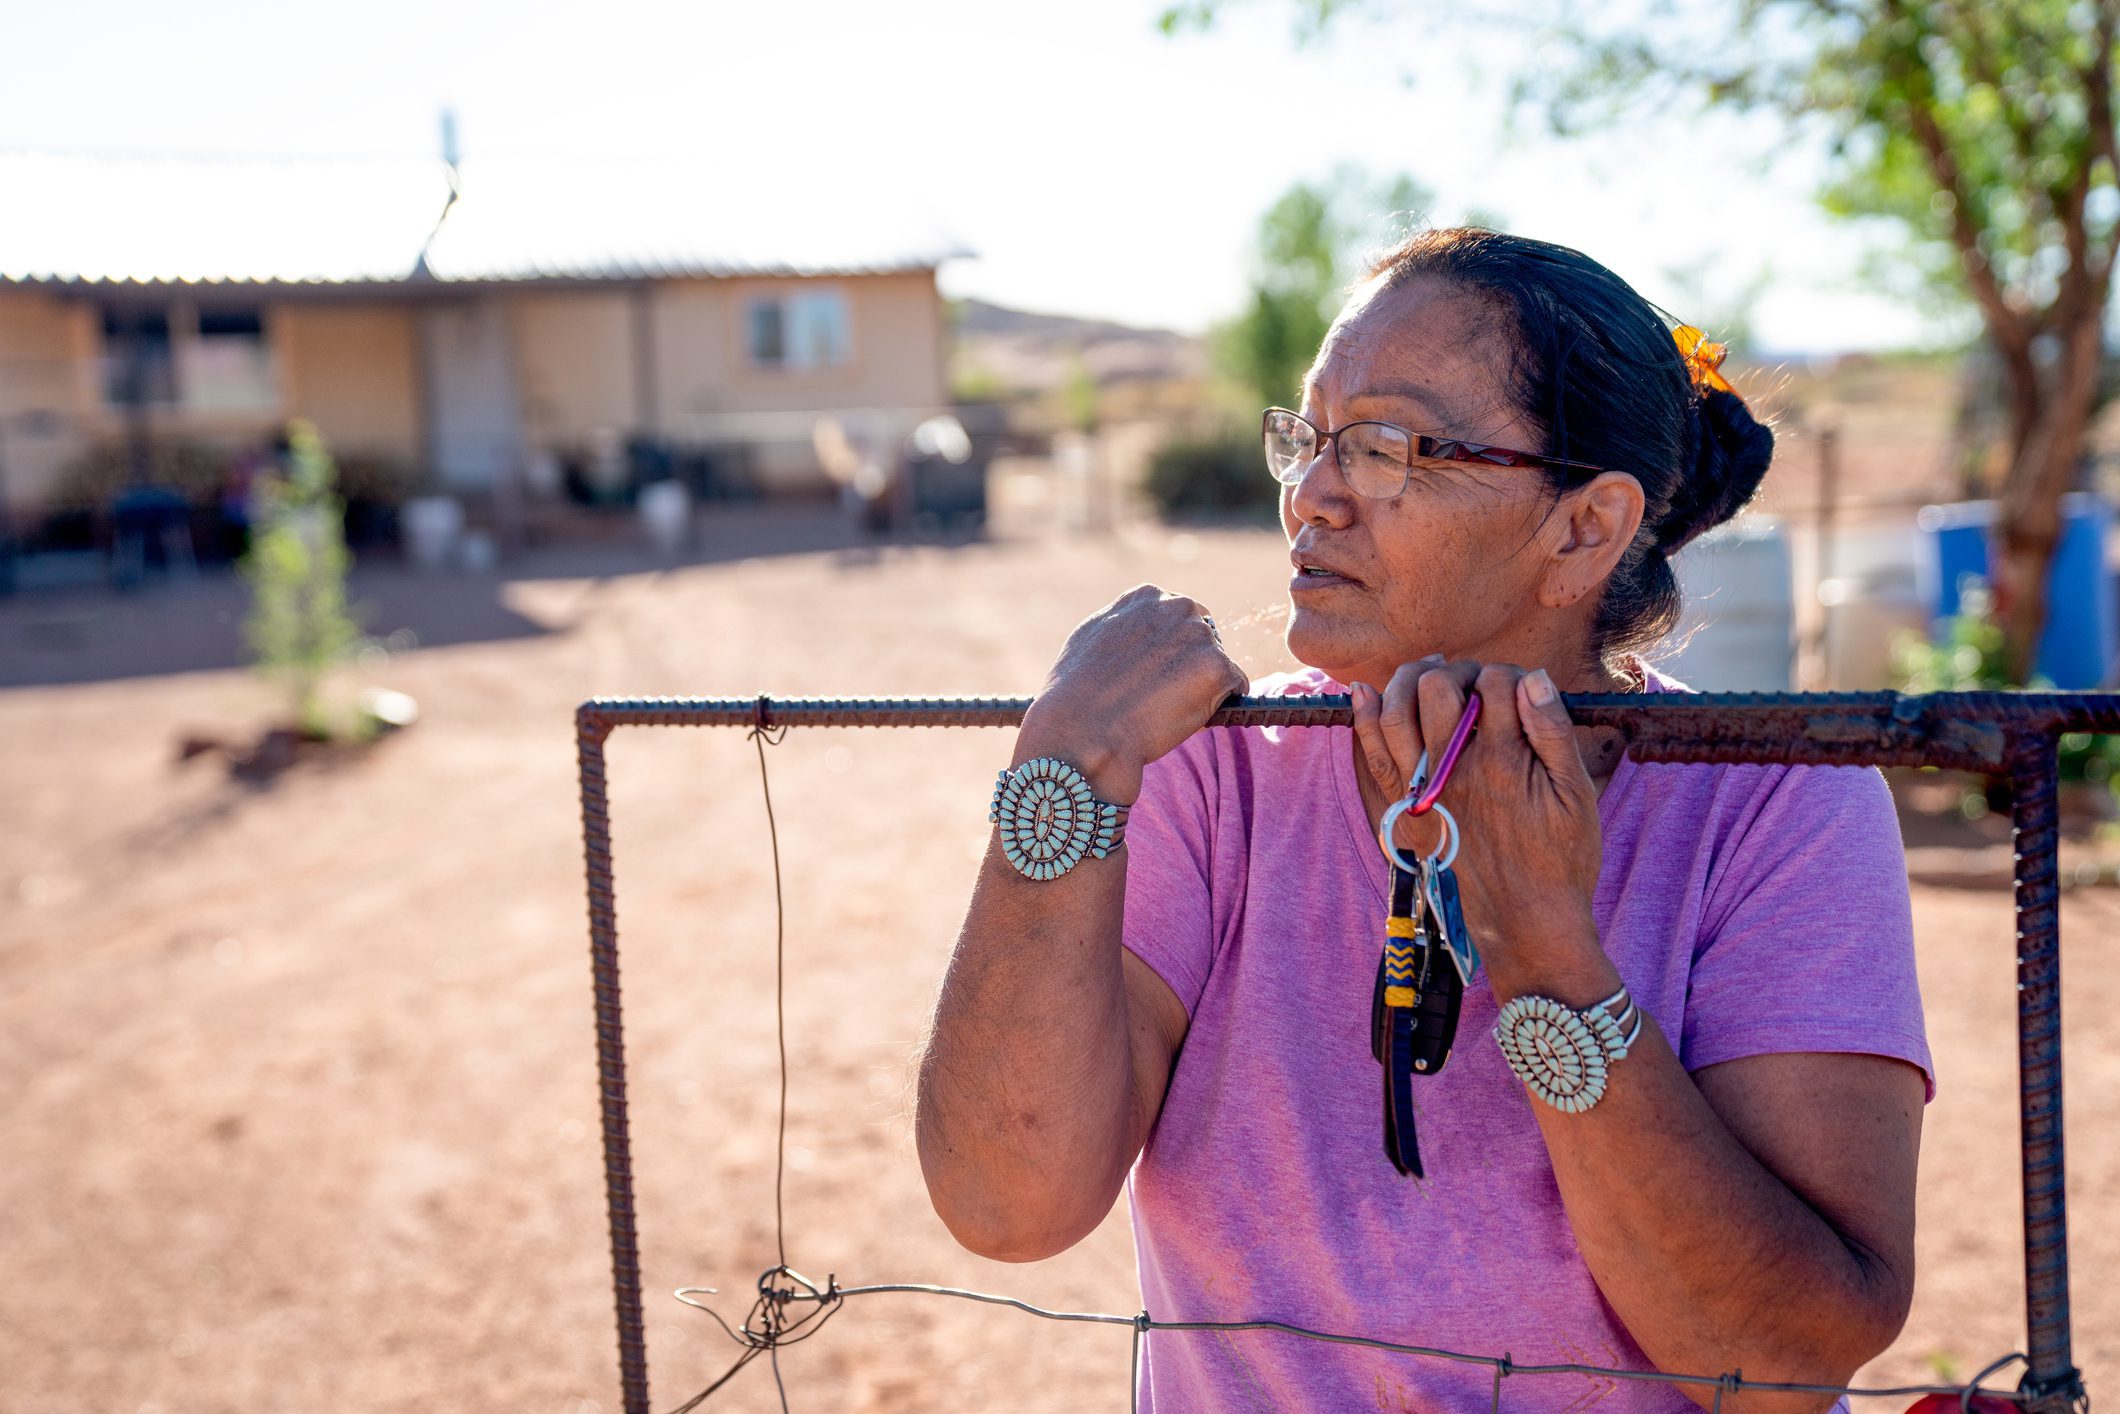 A Navajo woman standing by the gate of her home, with a concerned look on her face.